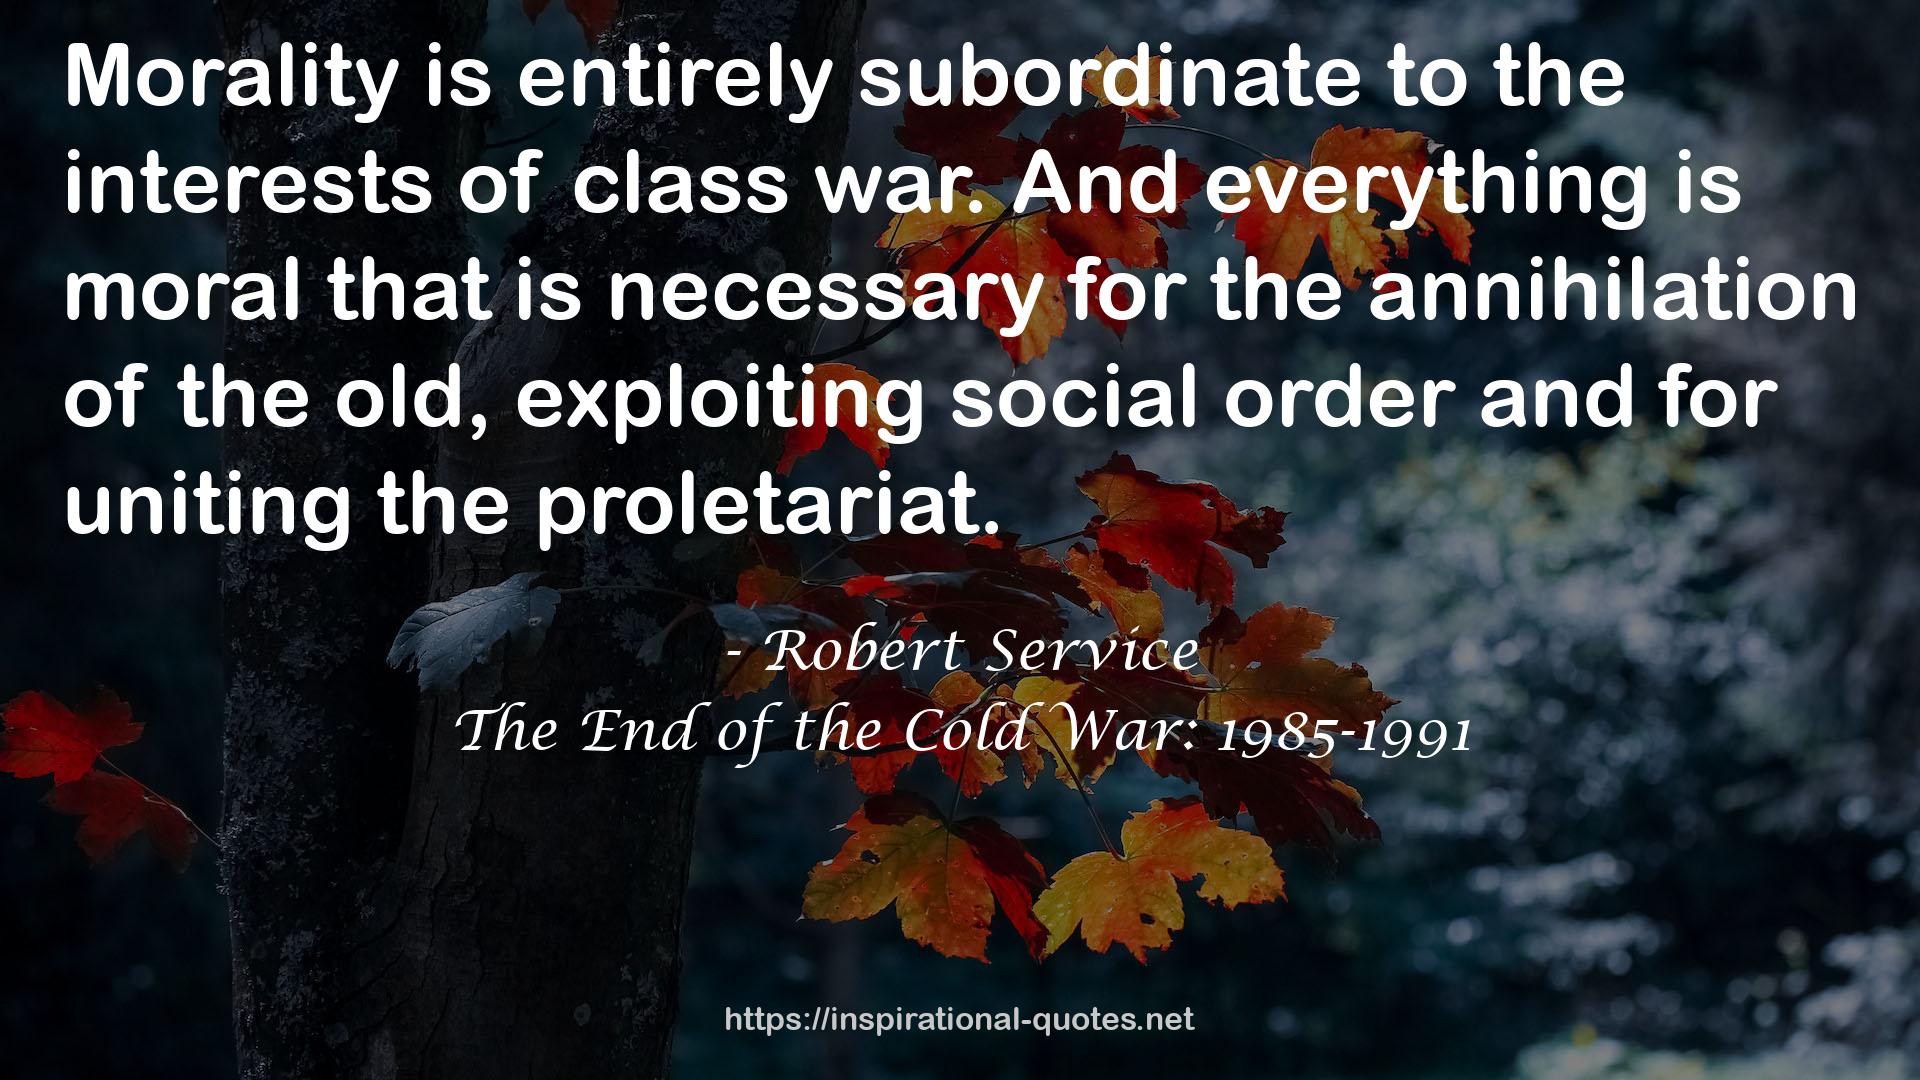 The End of the Cold War: 1985-1991 QUOTES